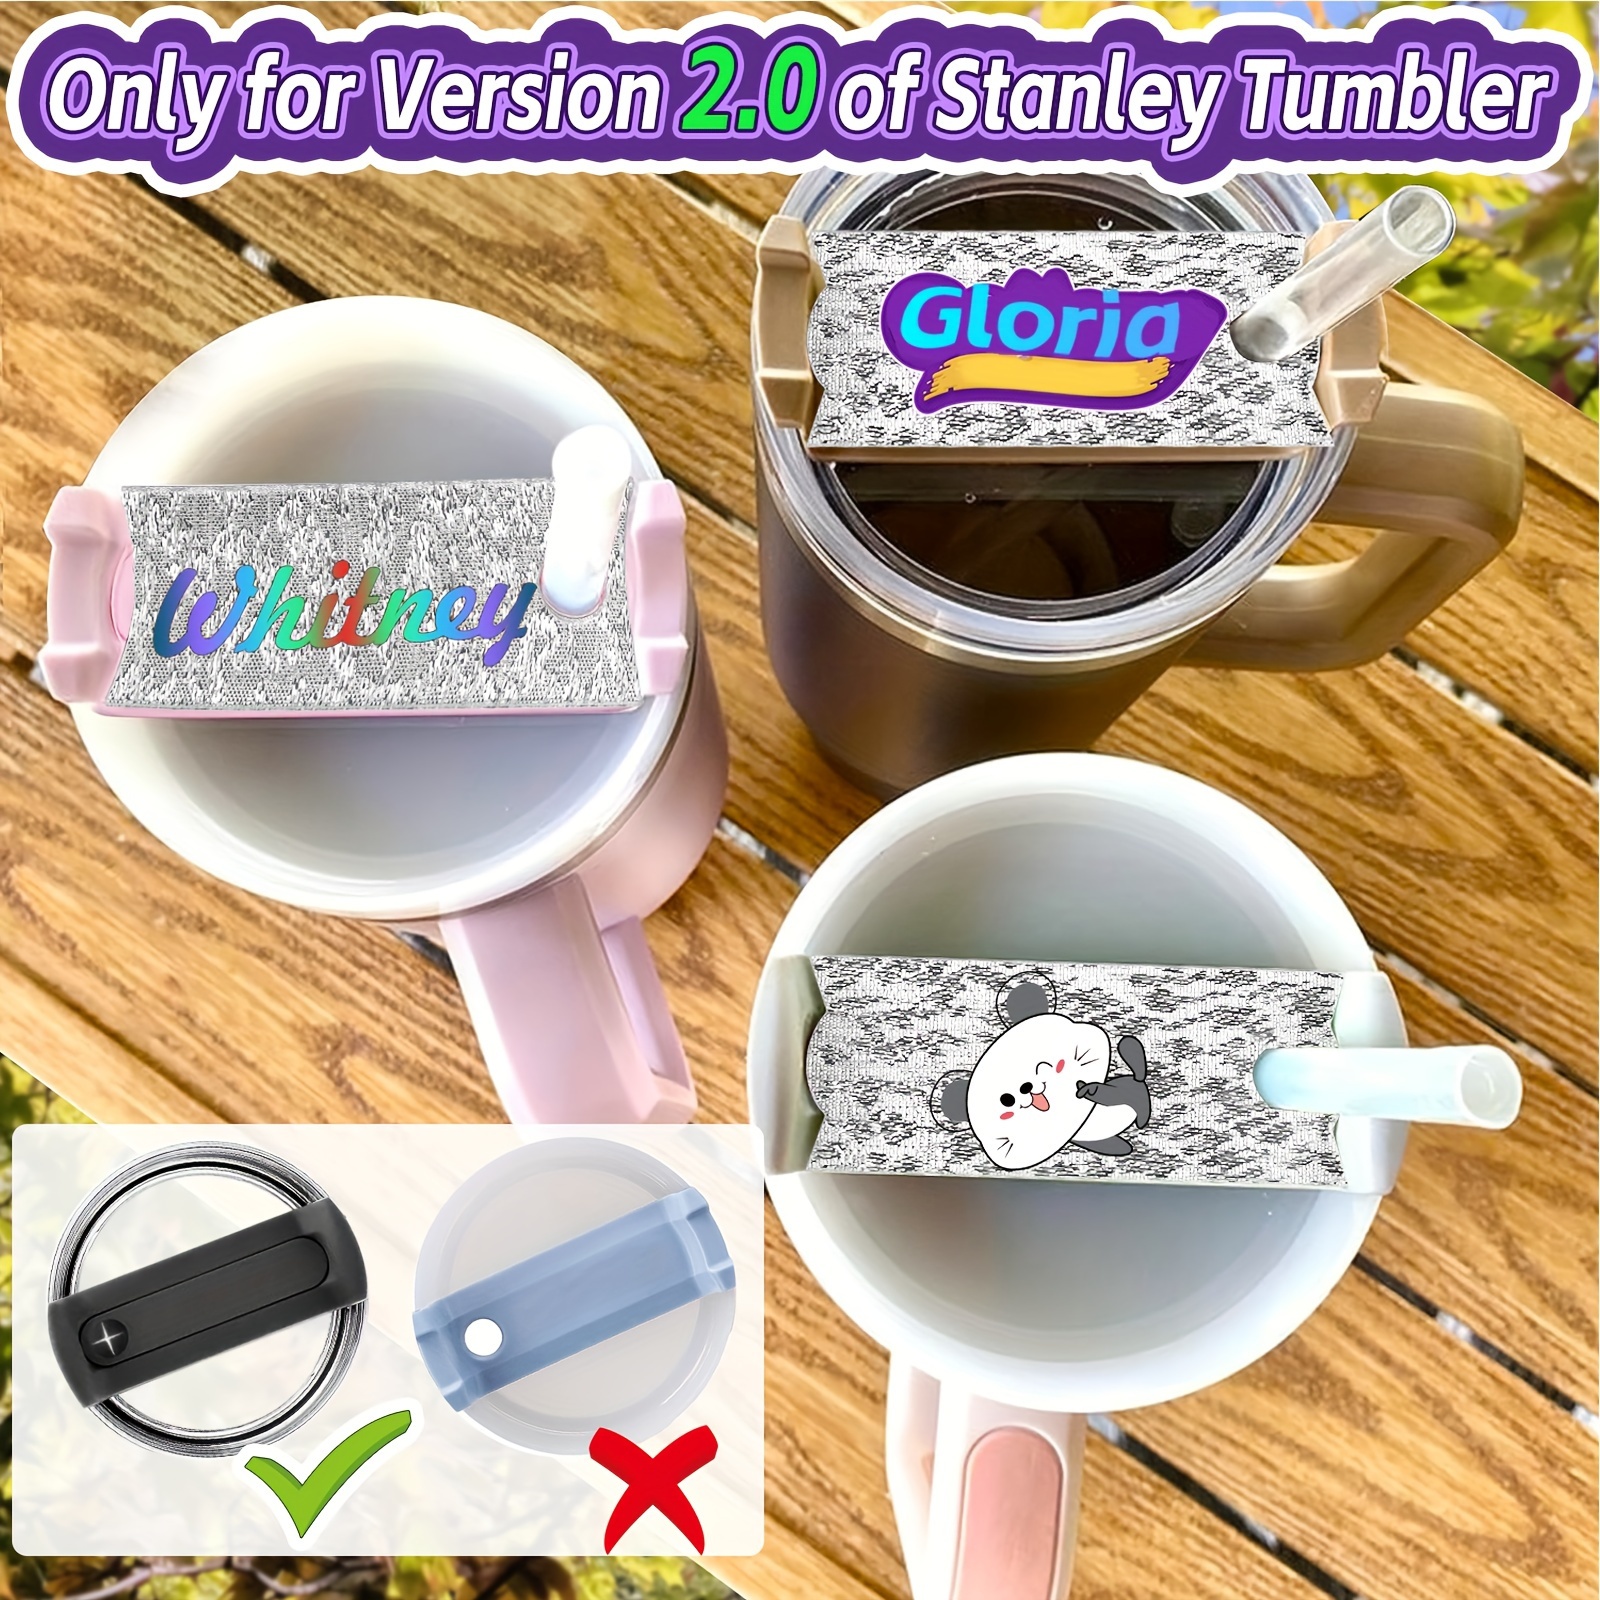 Buy 30oz or 40oz Stanley Tumbler Name Plate, Personalized Name Tag